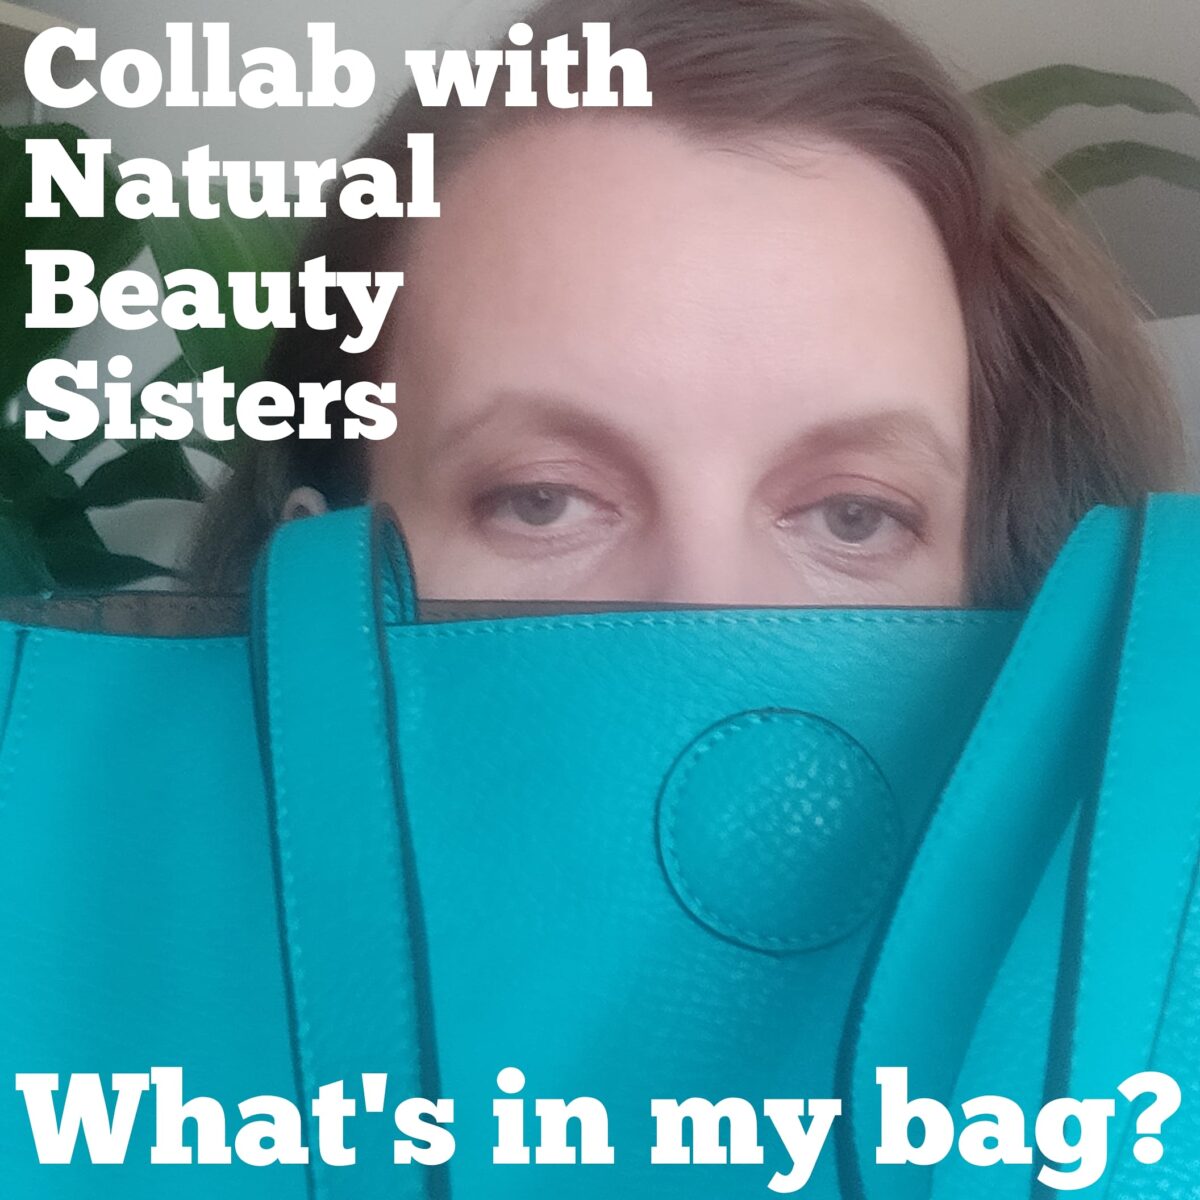 What's in my bag - collaboration with Natural Beauty Sisters